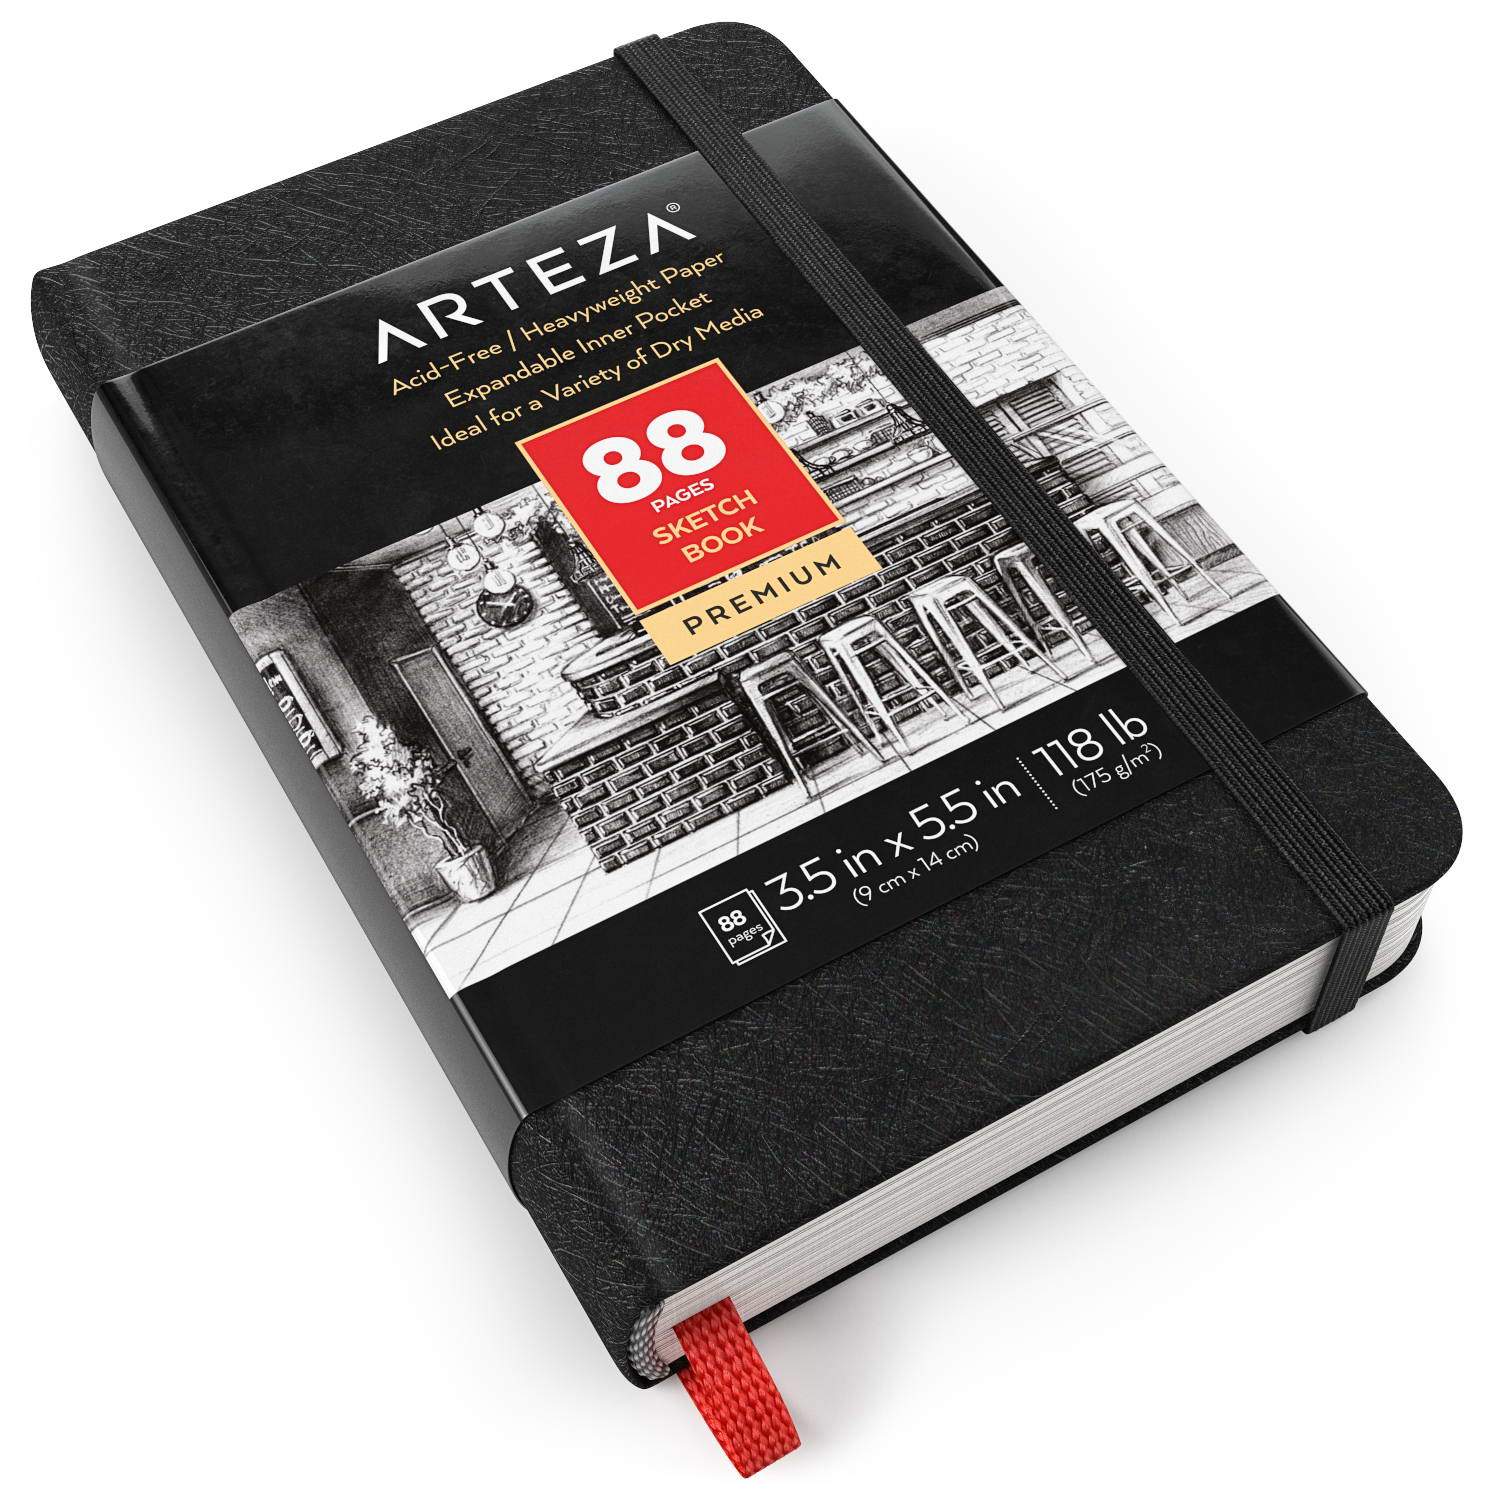 Mini Sketchbook, 3.5 x 5.5, 88 Pages - Pack of 2 –